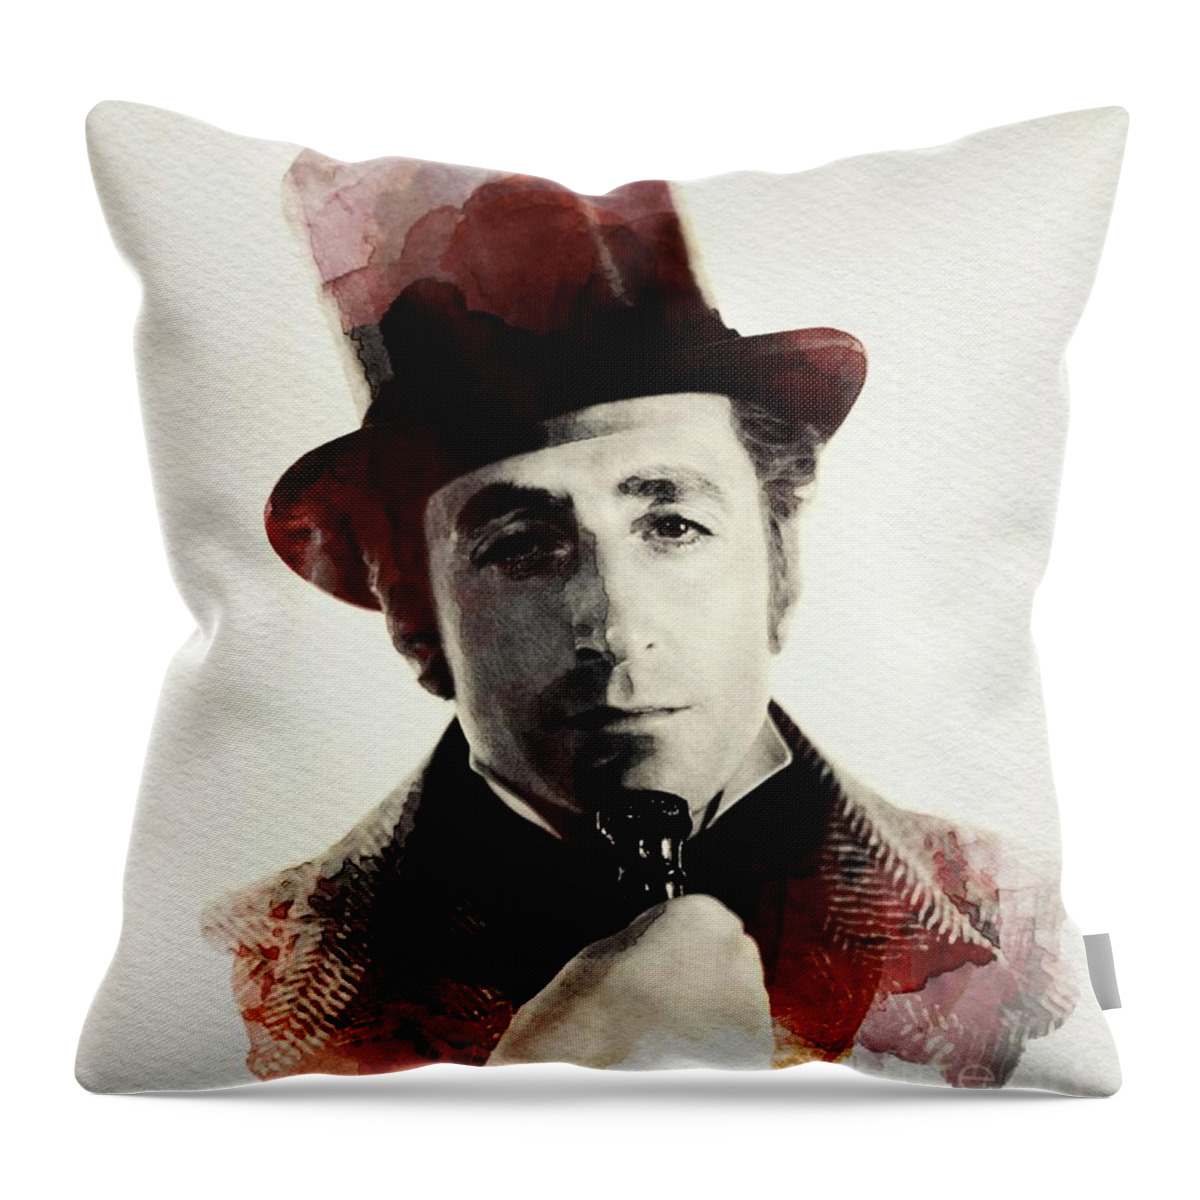 Basil Throw Pillow featuring the digital art Basil Rathbone, Actor #1 by Esoterica Art Agency